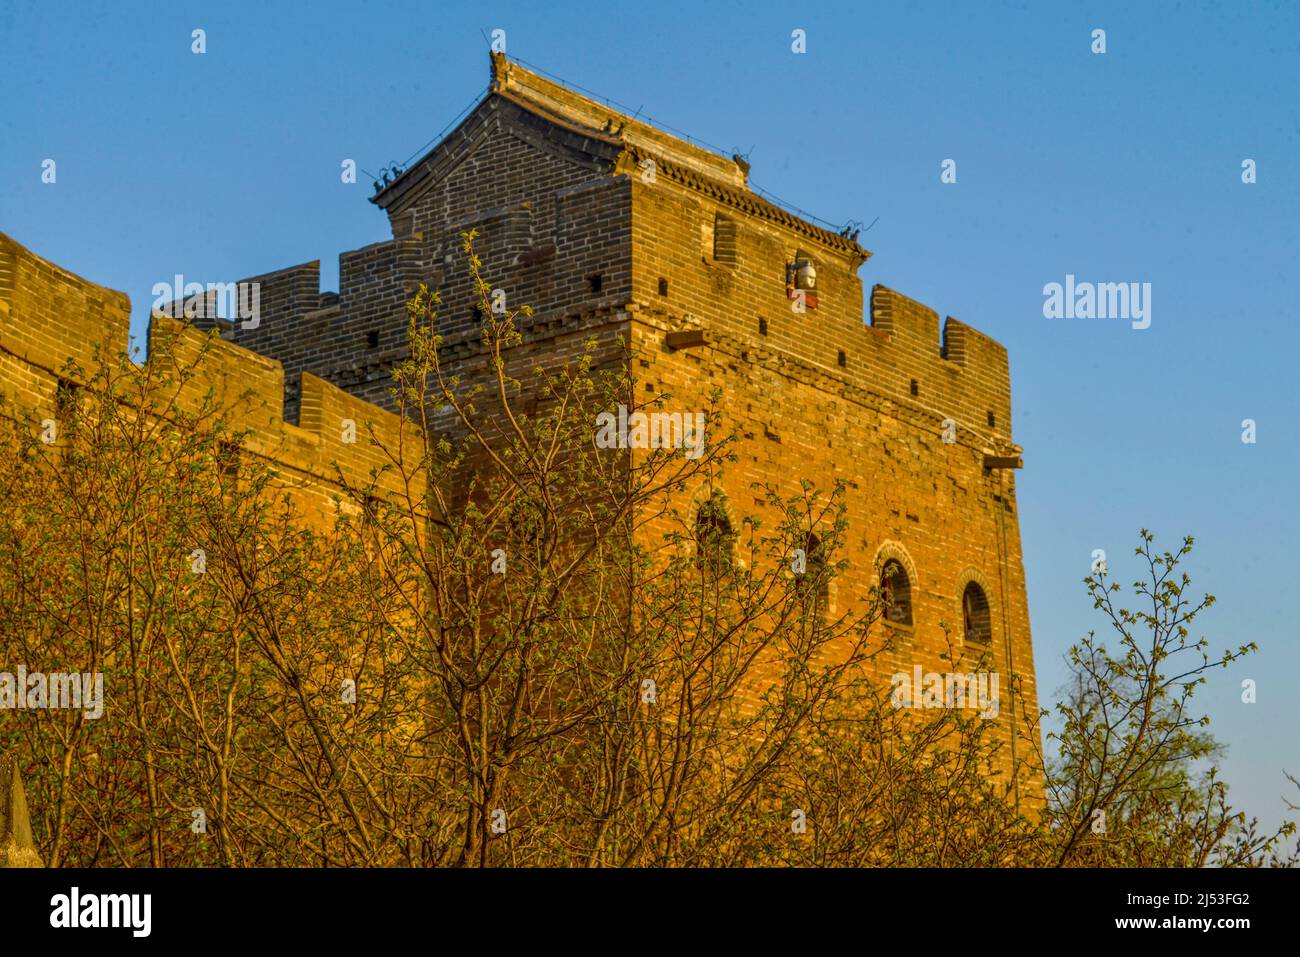 CHENGDE, CHINA - APRIL 20, 2022 - A view of the Jinshanling Great Wall Scenic Area in Chengde City, Hebei Province, April 20, 2022. Stock Photo